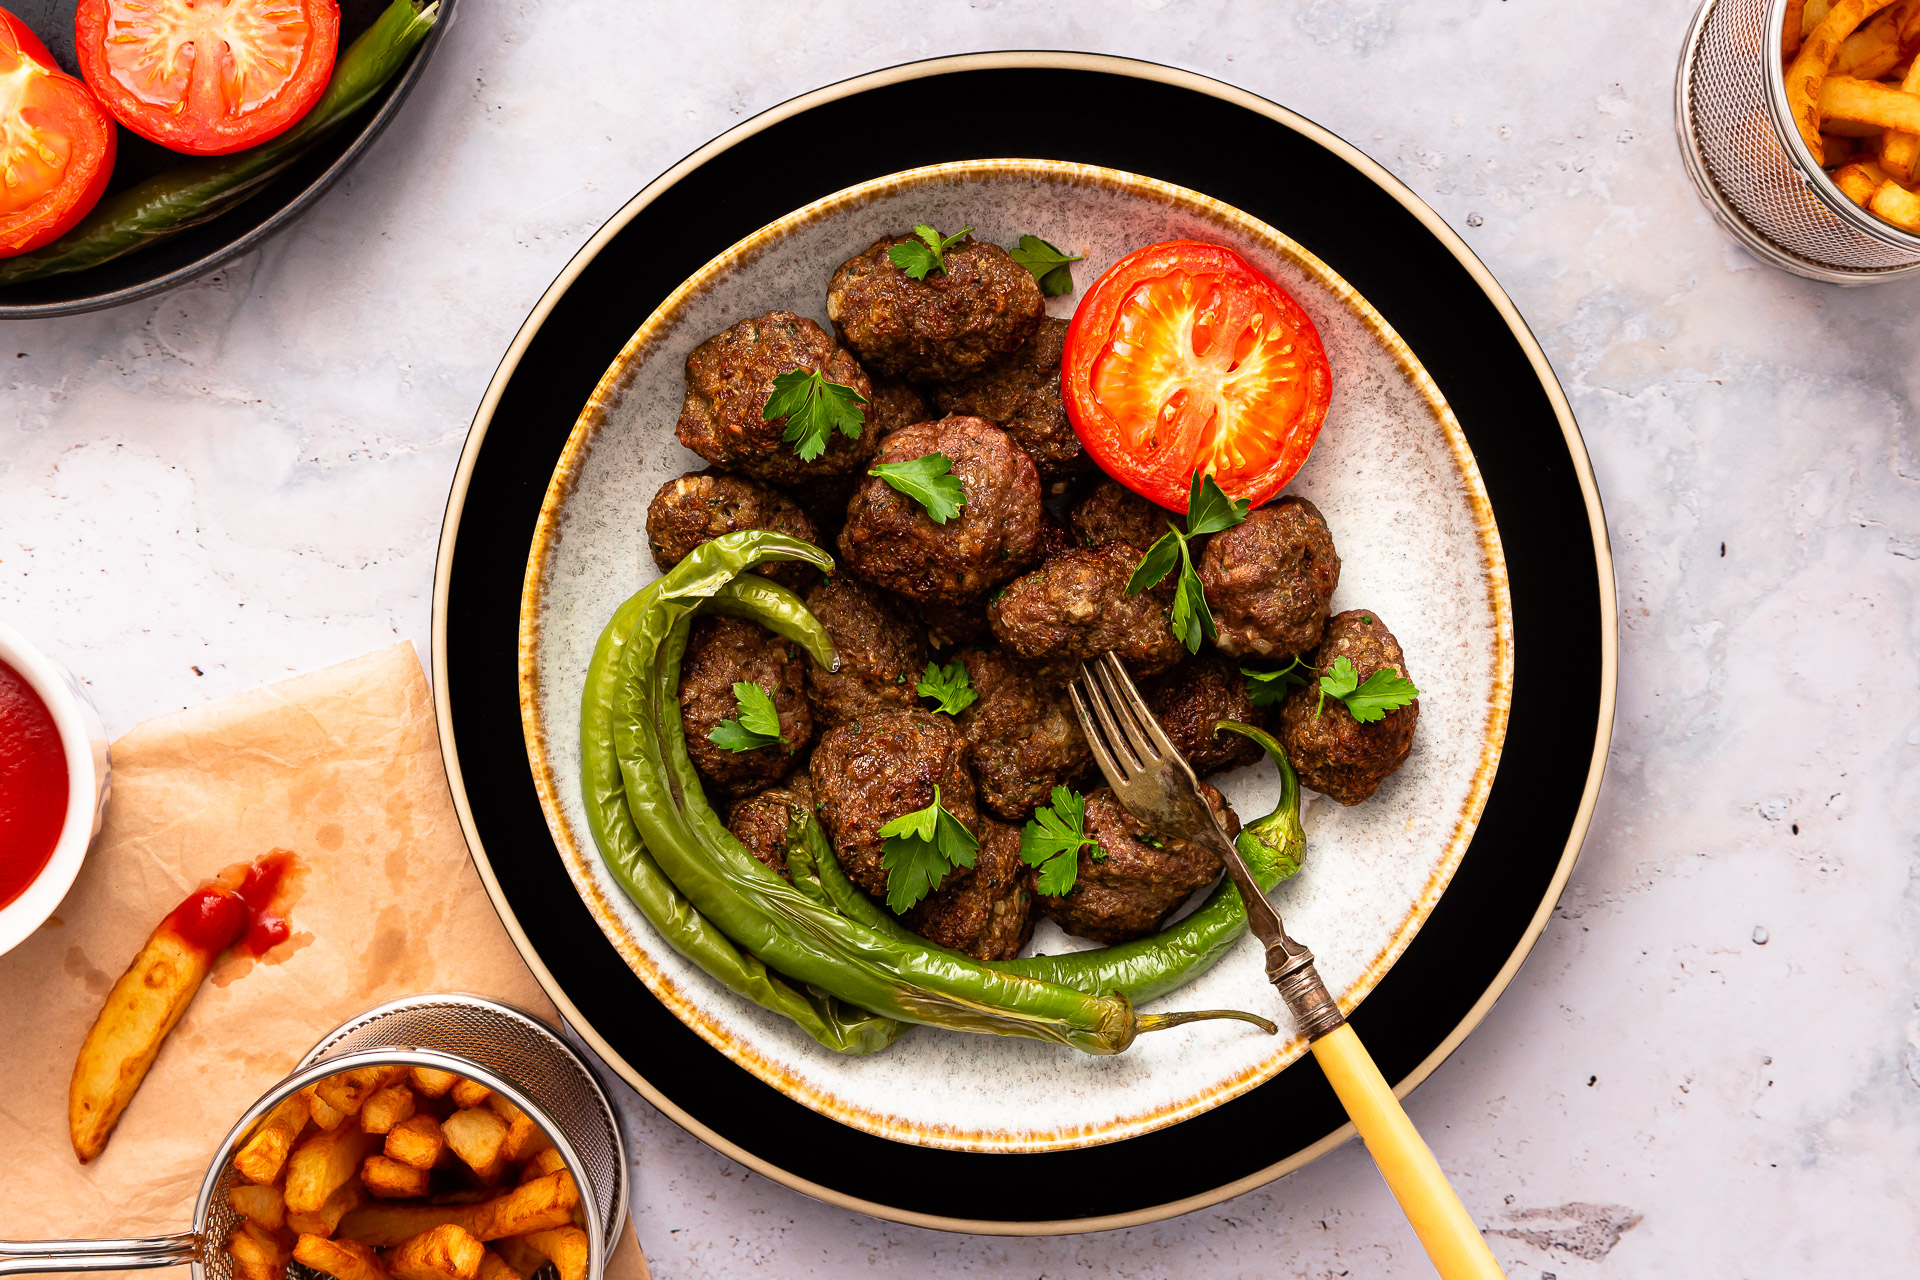 TURKISH MEATBALLS, SUCCULENT, SPICY AND TASTY